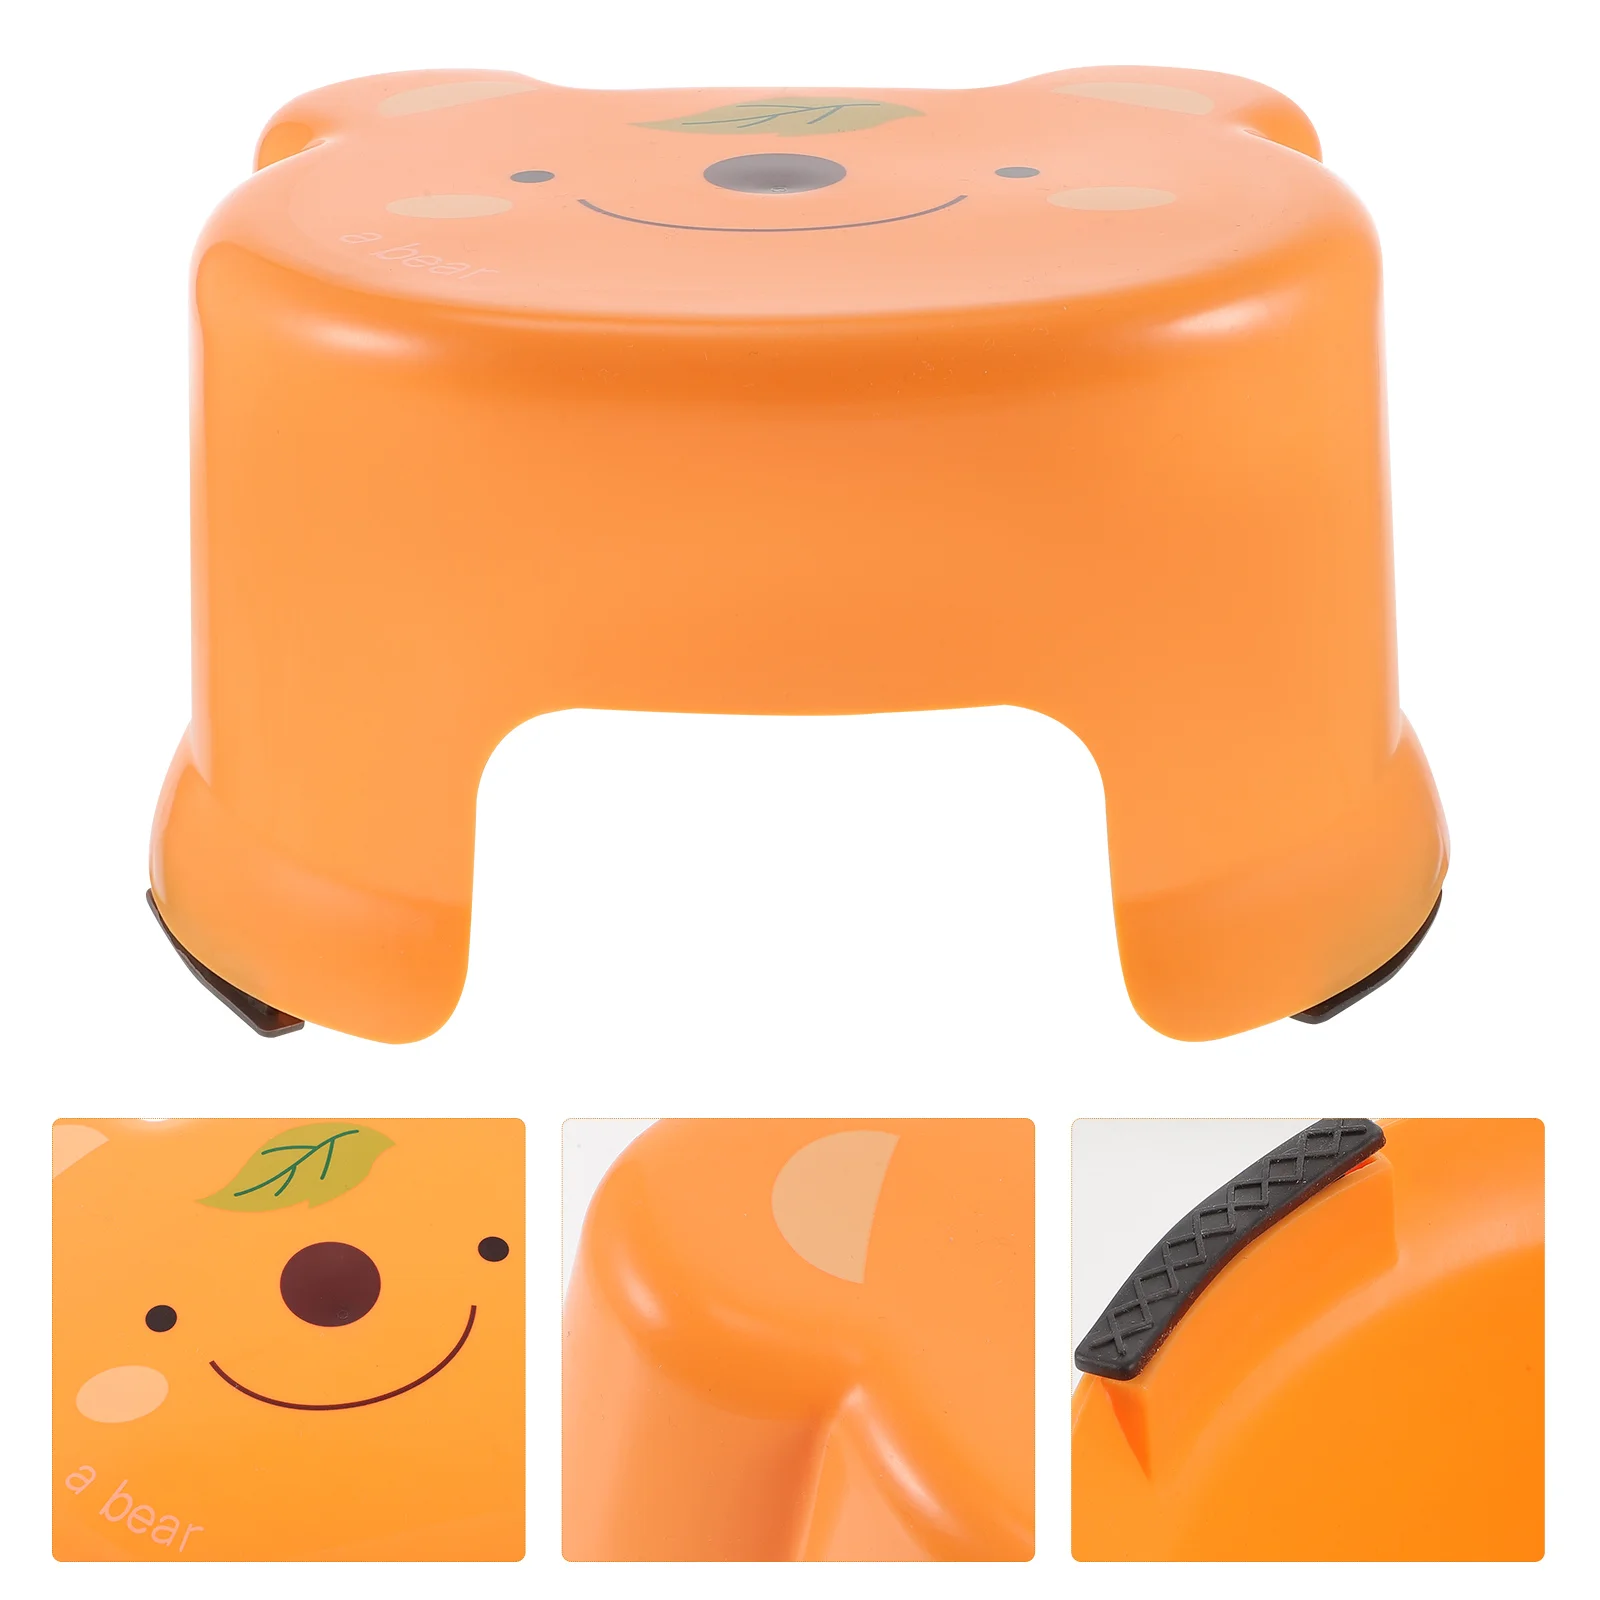 

Stool Step Bathroom Toilet Kids Stools Toddler Foot Kitchen Plastic Training Potty Safety Helper Adults Steps Toddlers Poop